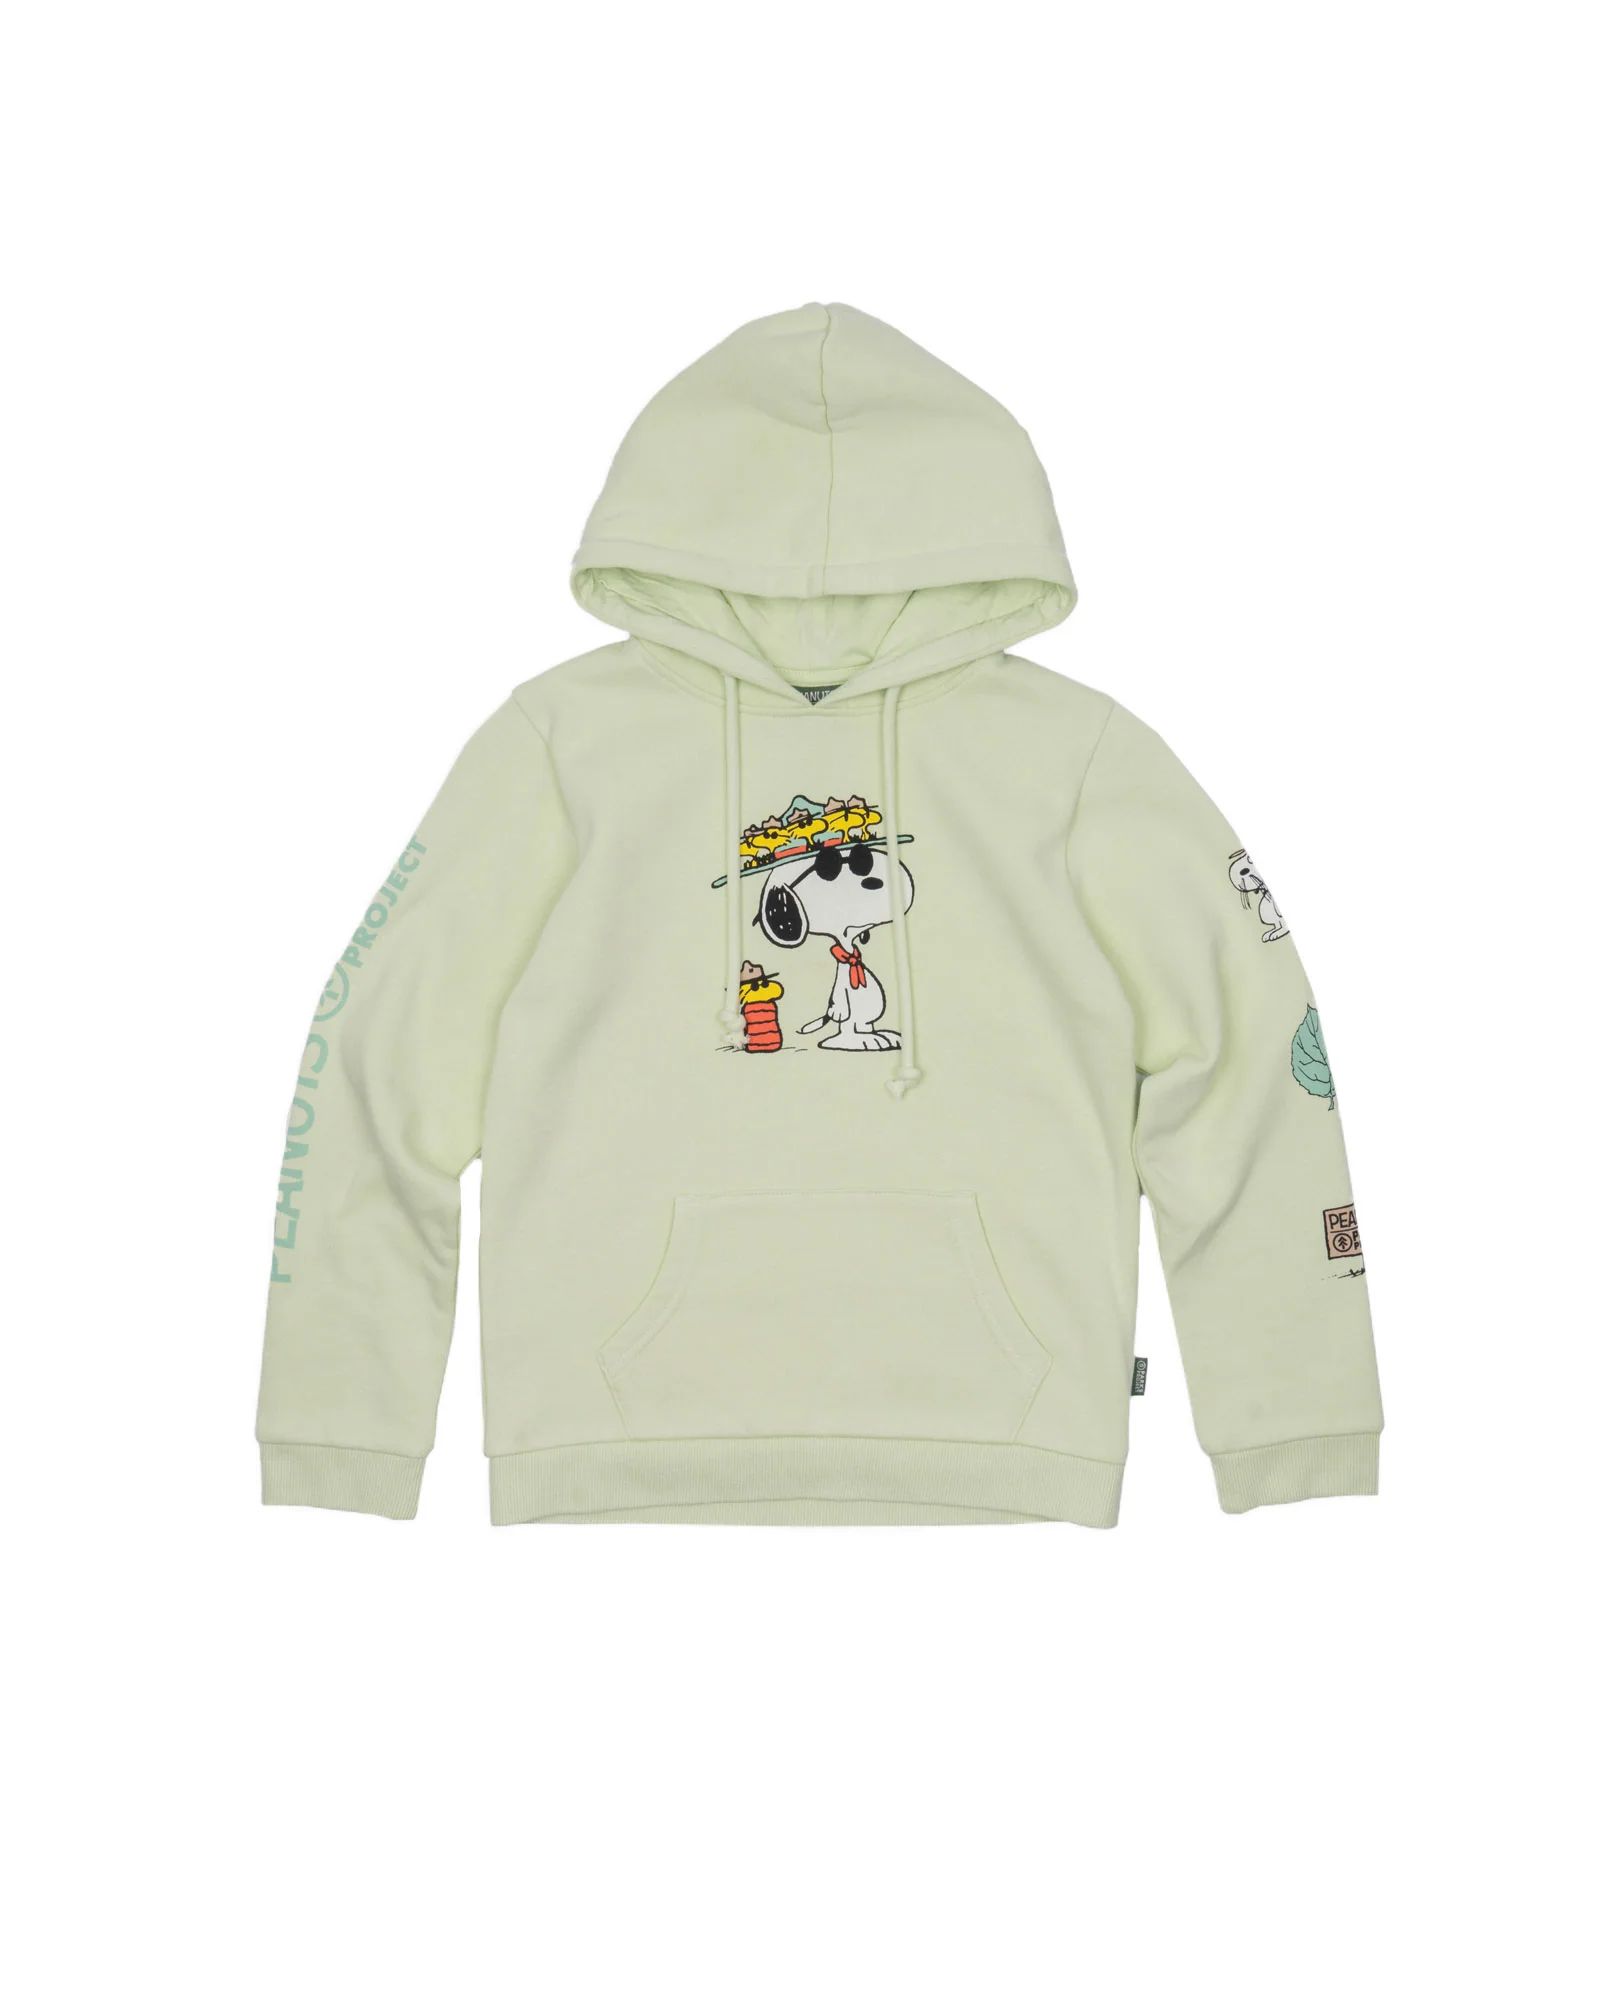 Peanuts x Parks Project Adventure Awaits Youth Hoodie | Parks Project